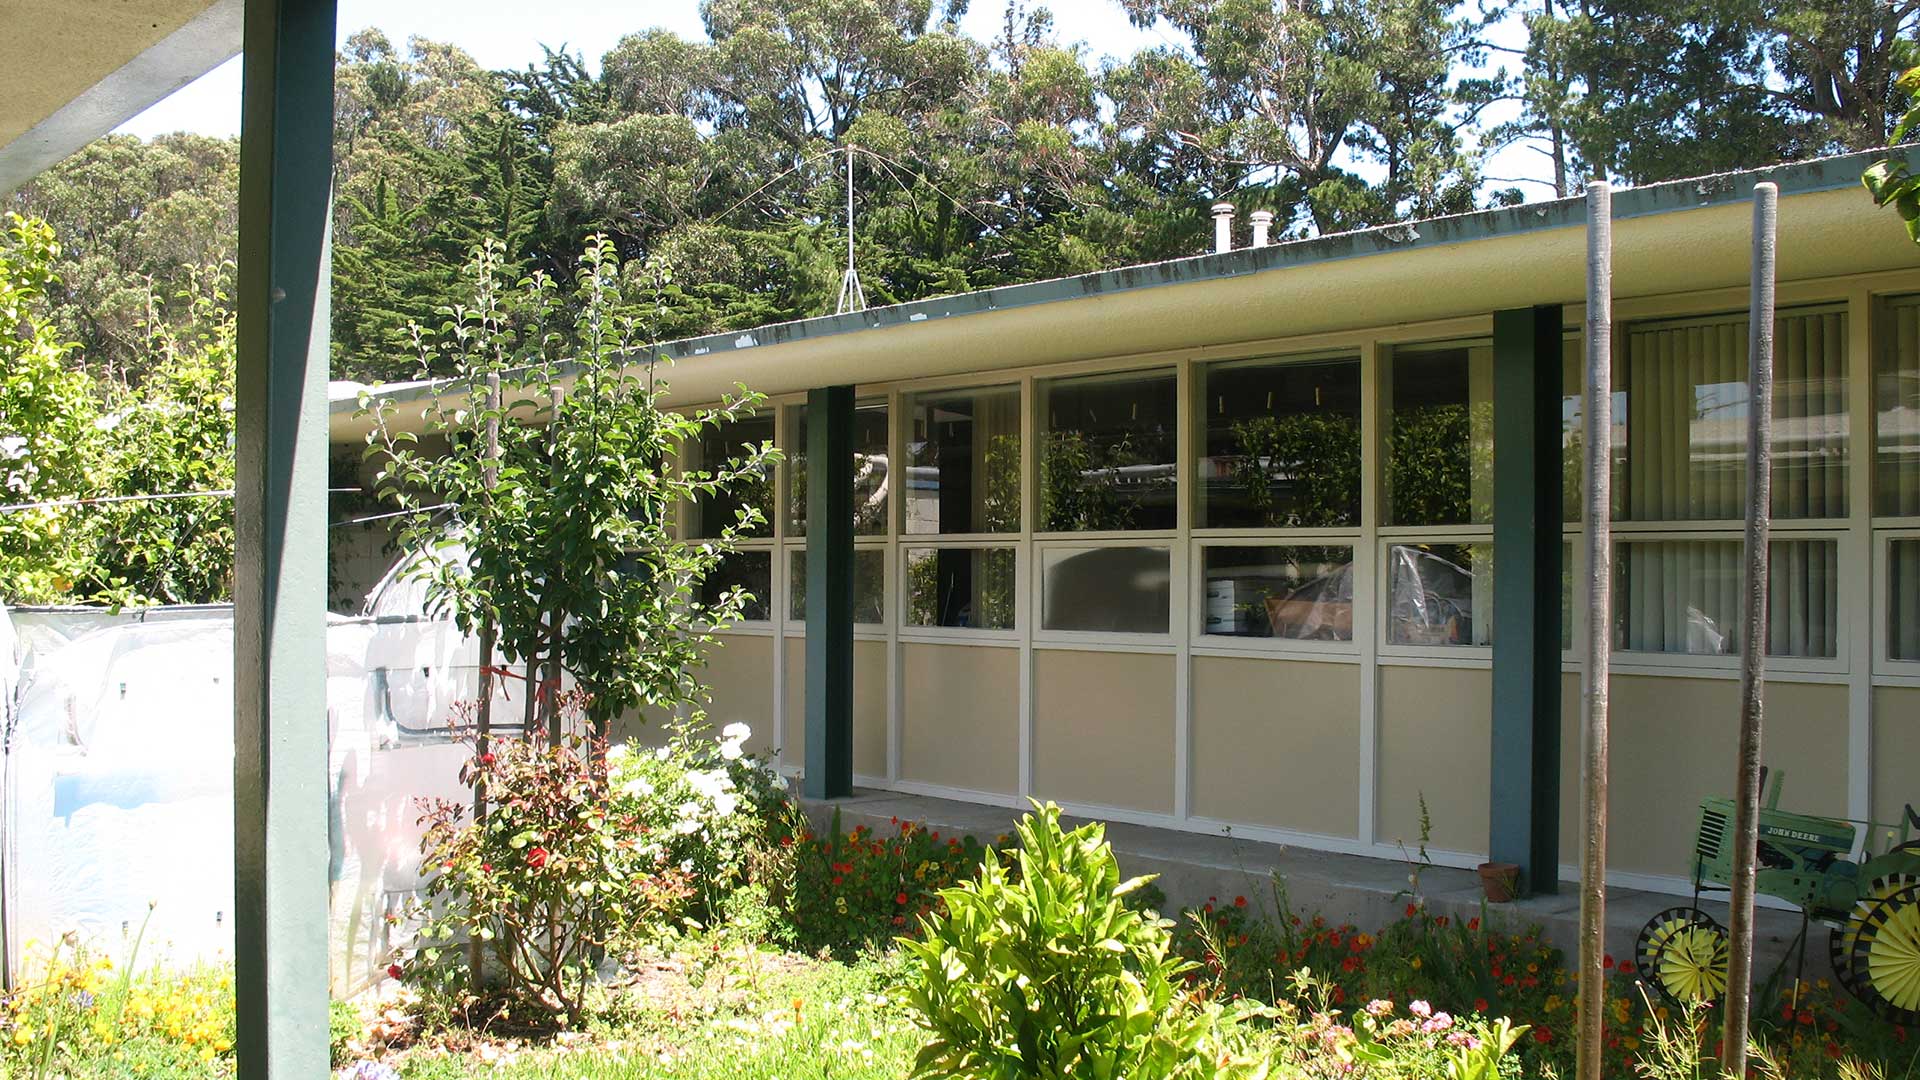 School building with beige walls and green trim, and many windows.